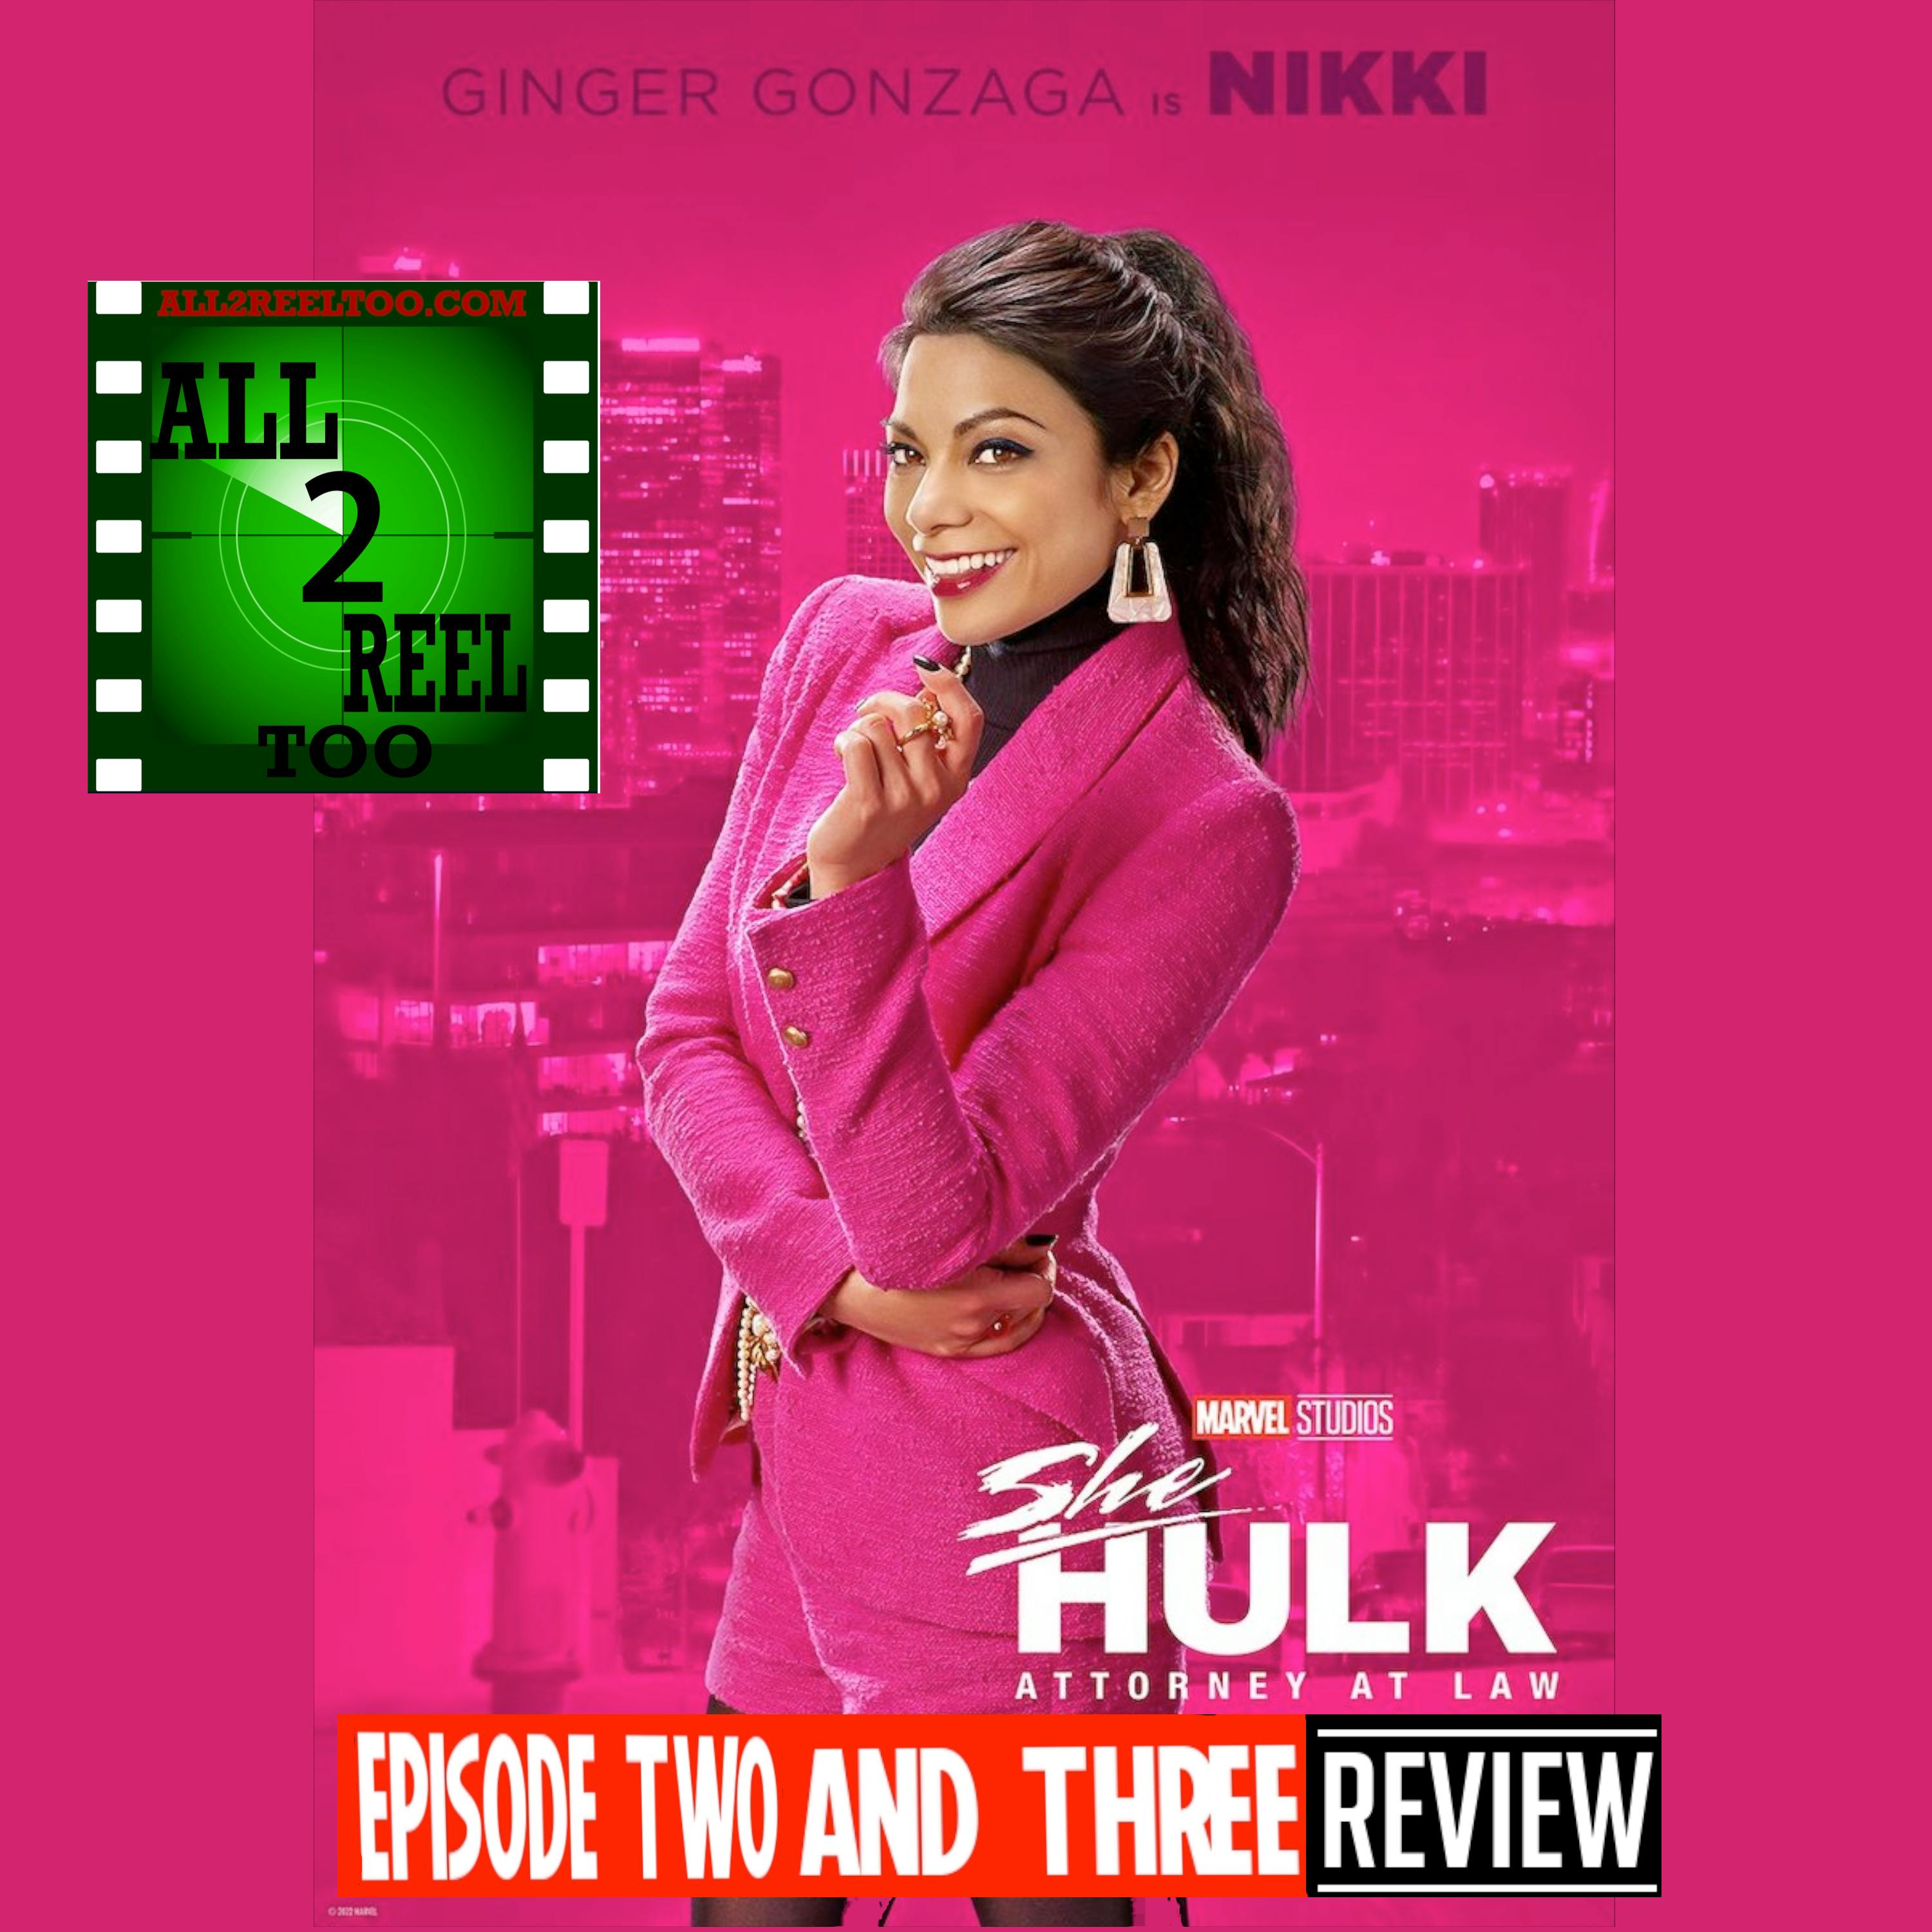 She-Hulk: Attorney at Law - EPISODE 2 and 3 REVIEW